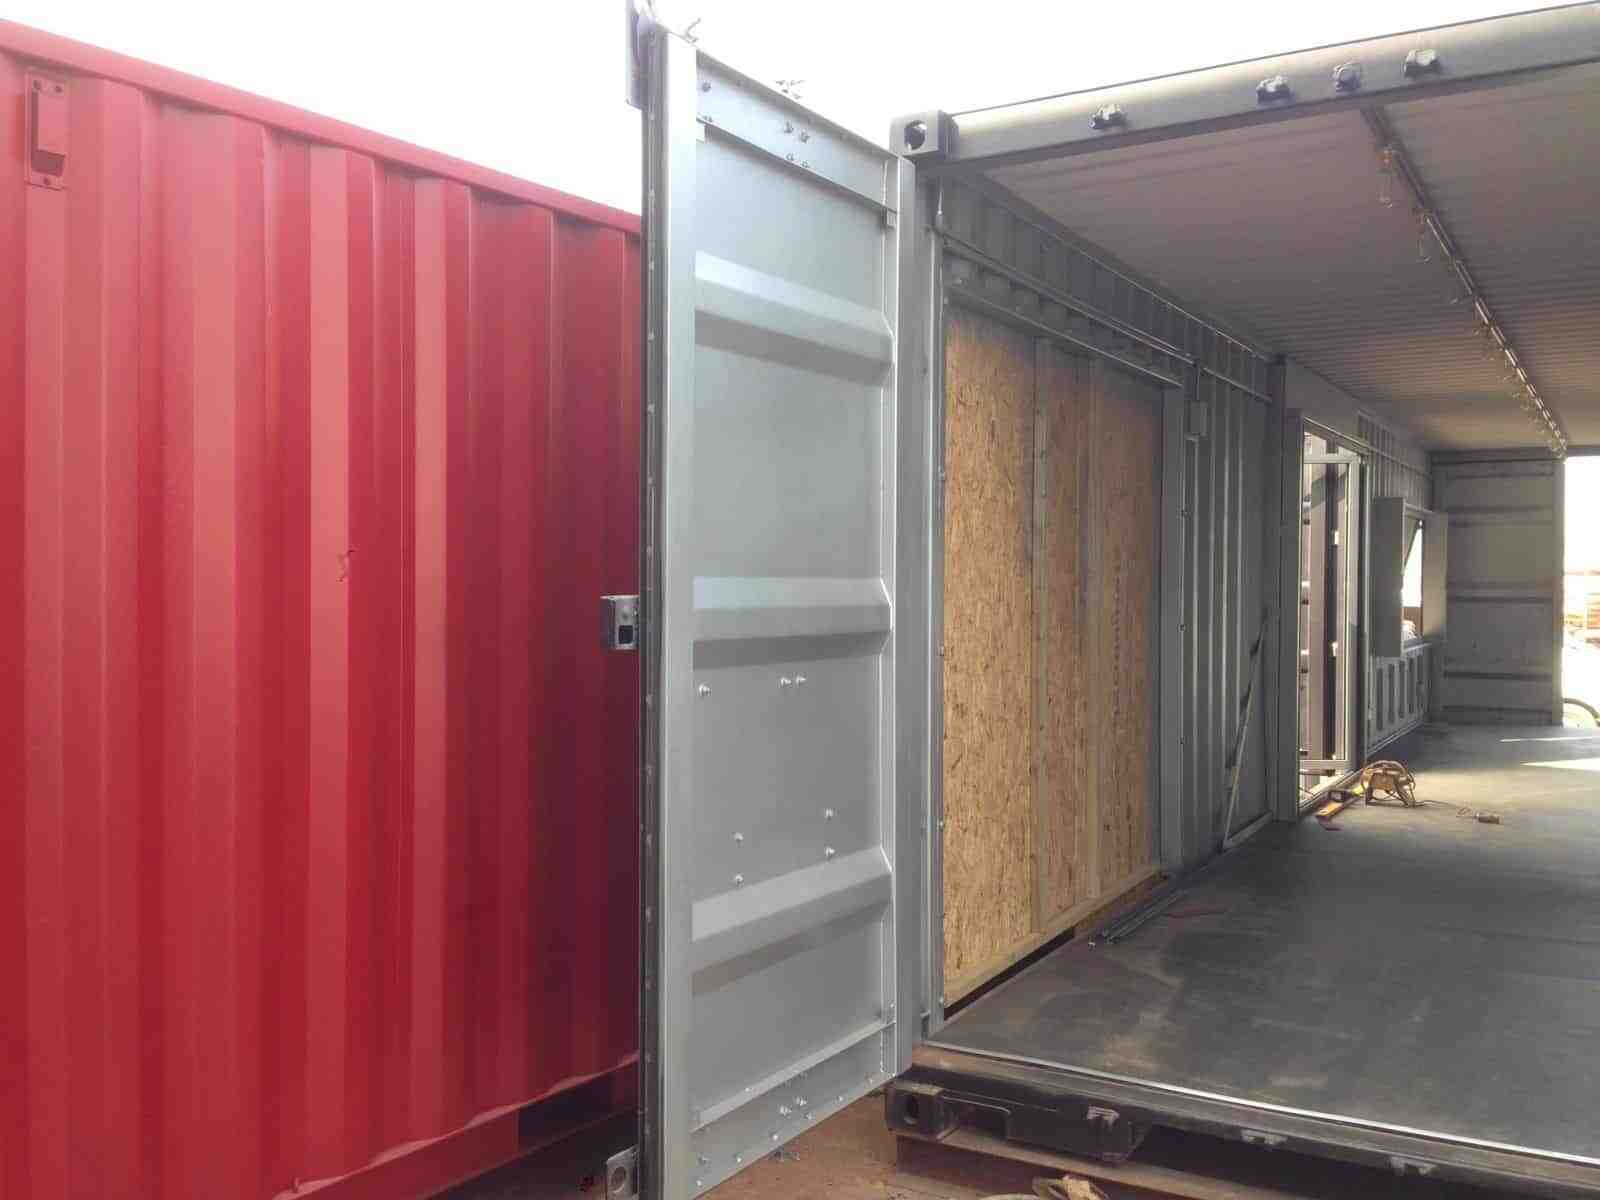 Comment joindre 2 container ?